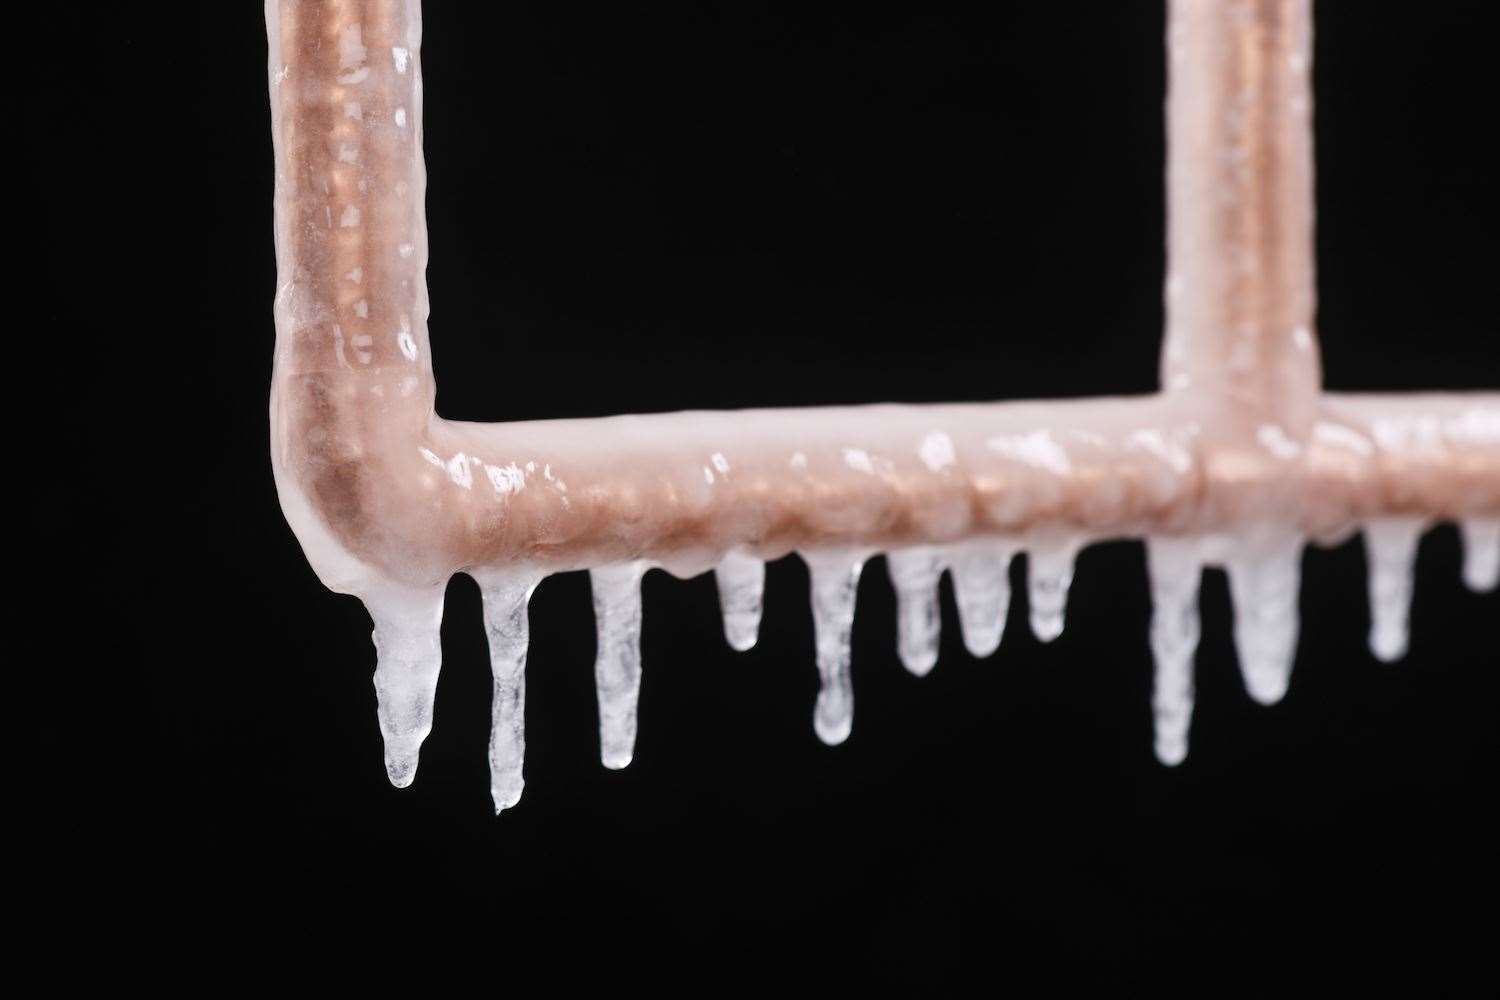 Frozen pipes can cause thousands of pounds of damage.